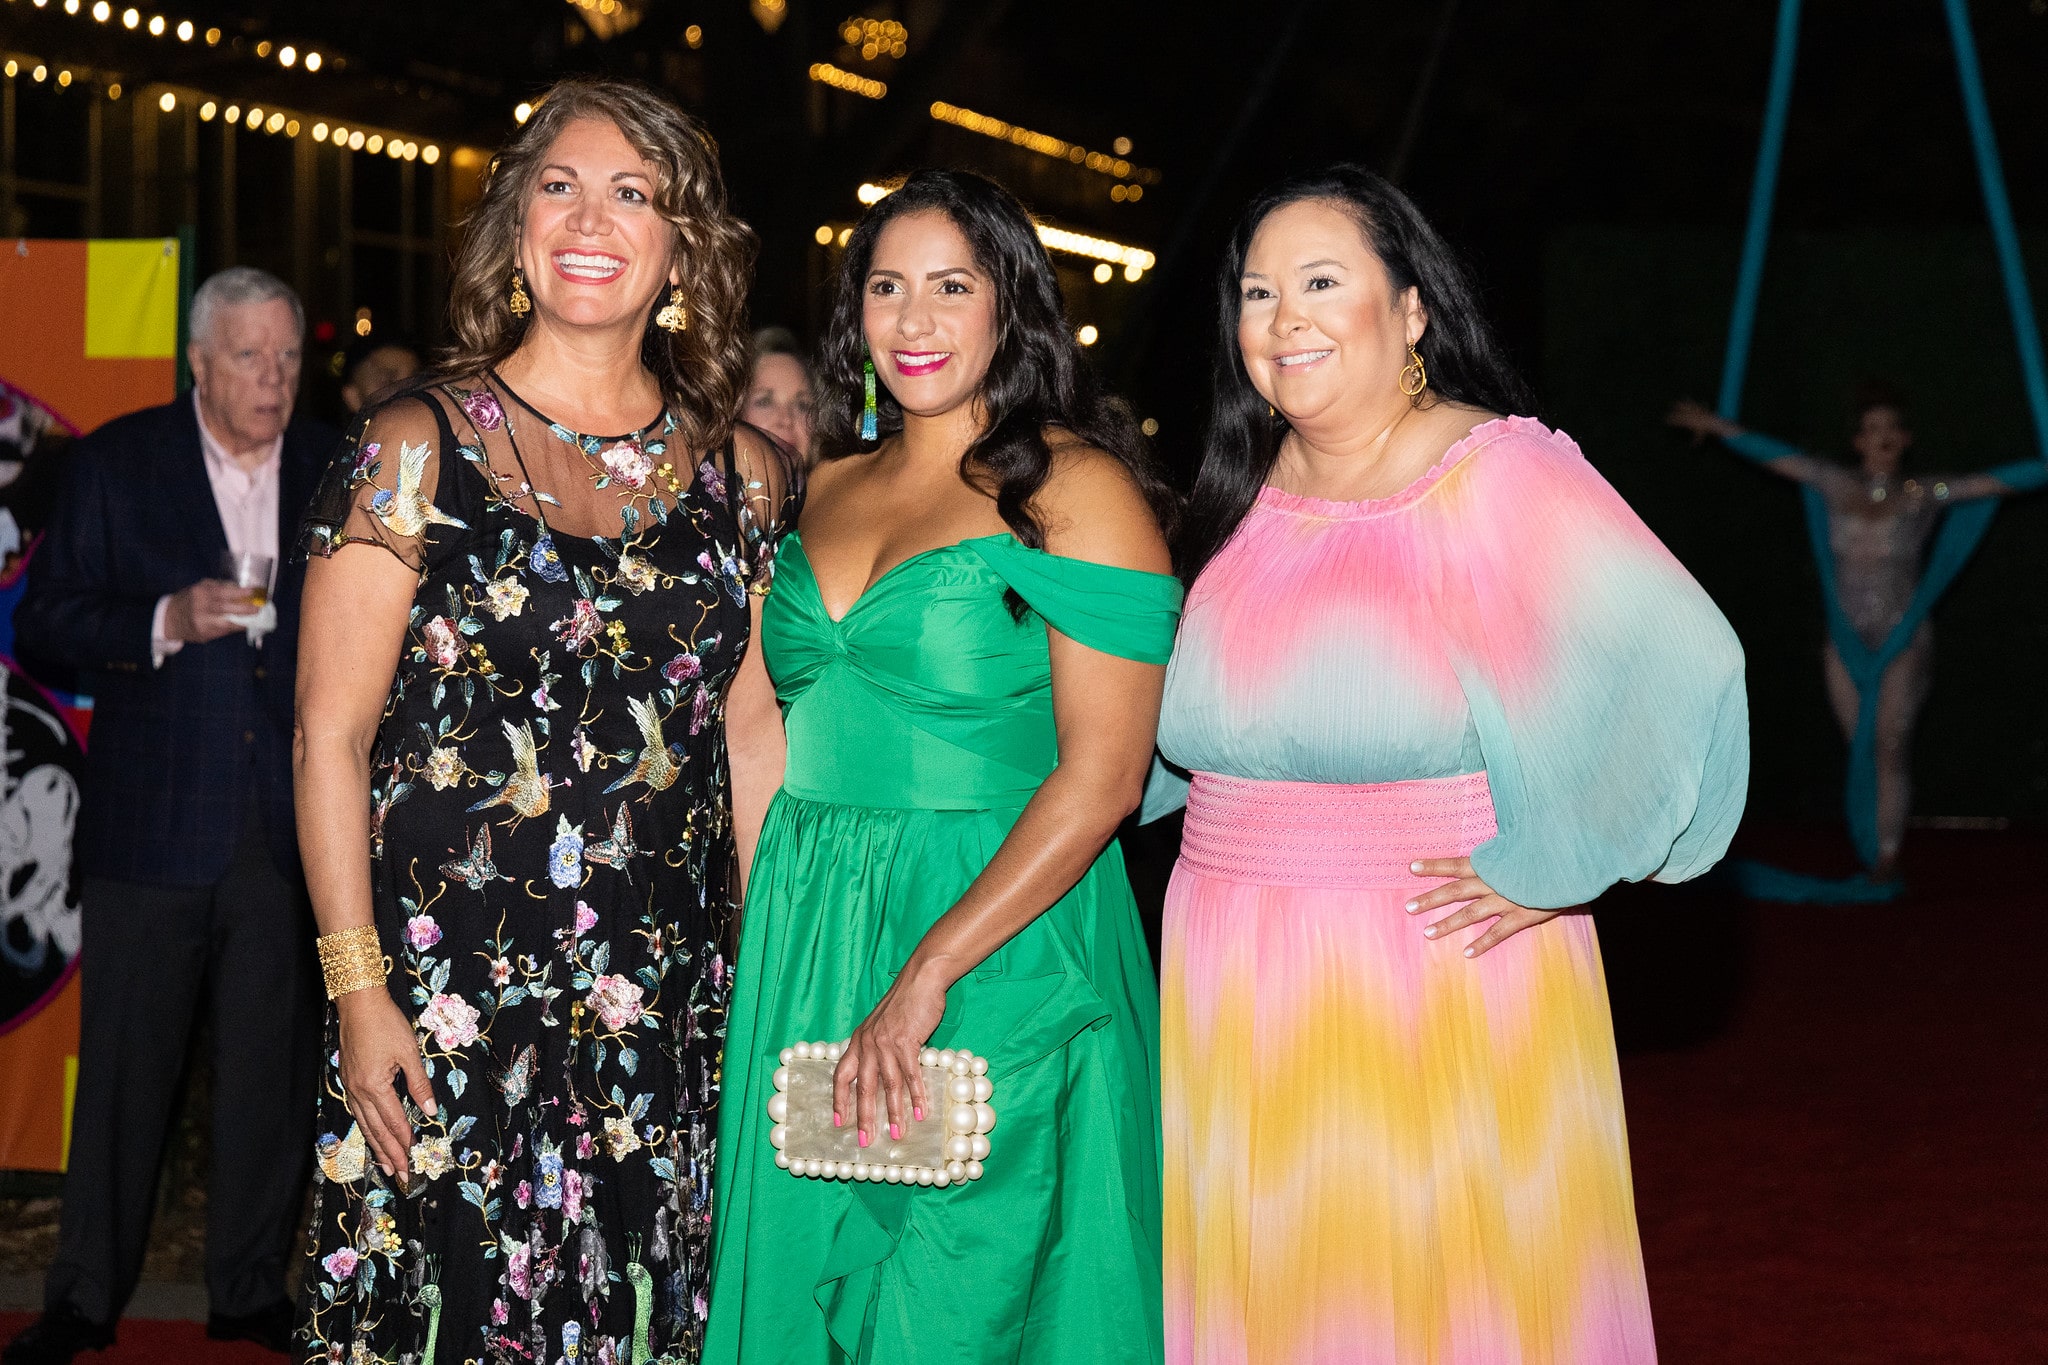 From L-R: Frances Castaneda Dyess, President, Houston East End Chamber of Commerce Staci LaToison, Founder & CEO, Dream Big Ventures and Discovery Green Gala-on-the-Green Co-Chair Vicki Luna, Public Affairs, HEB  Gala on the Green® at Discovery Green in downtown Houston. February 23, 2023. Photo: Lawrence Elizabeth Knox